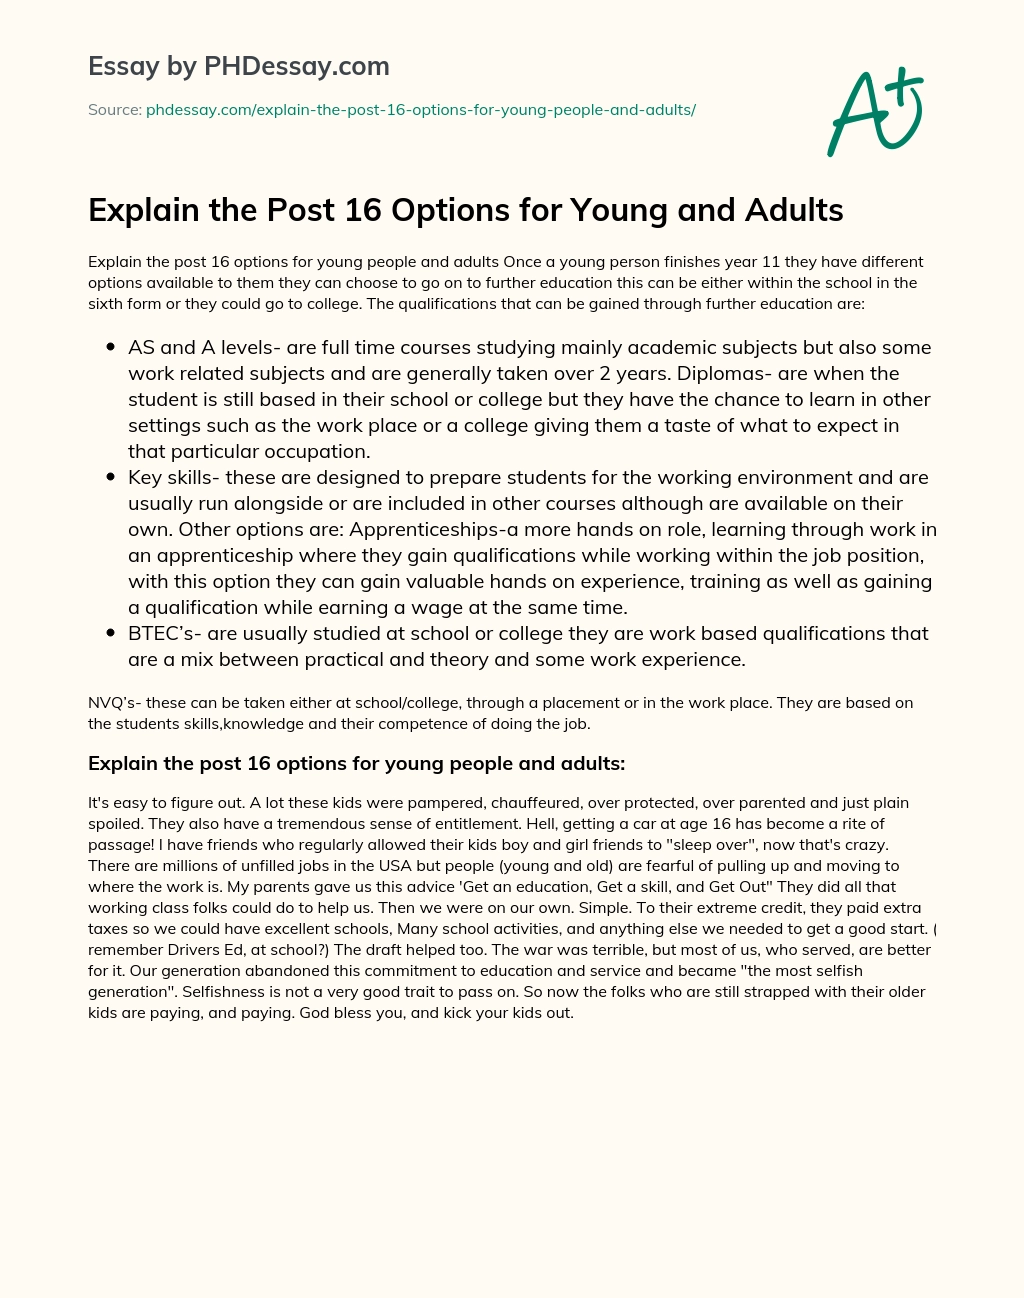 Explain the Post 16 Options for Young and Adults essay